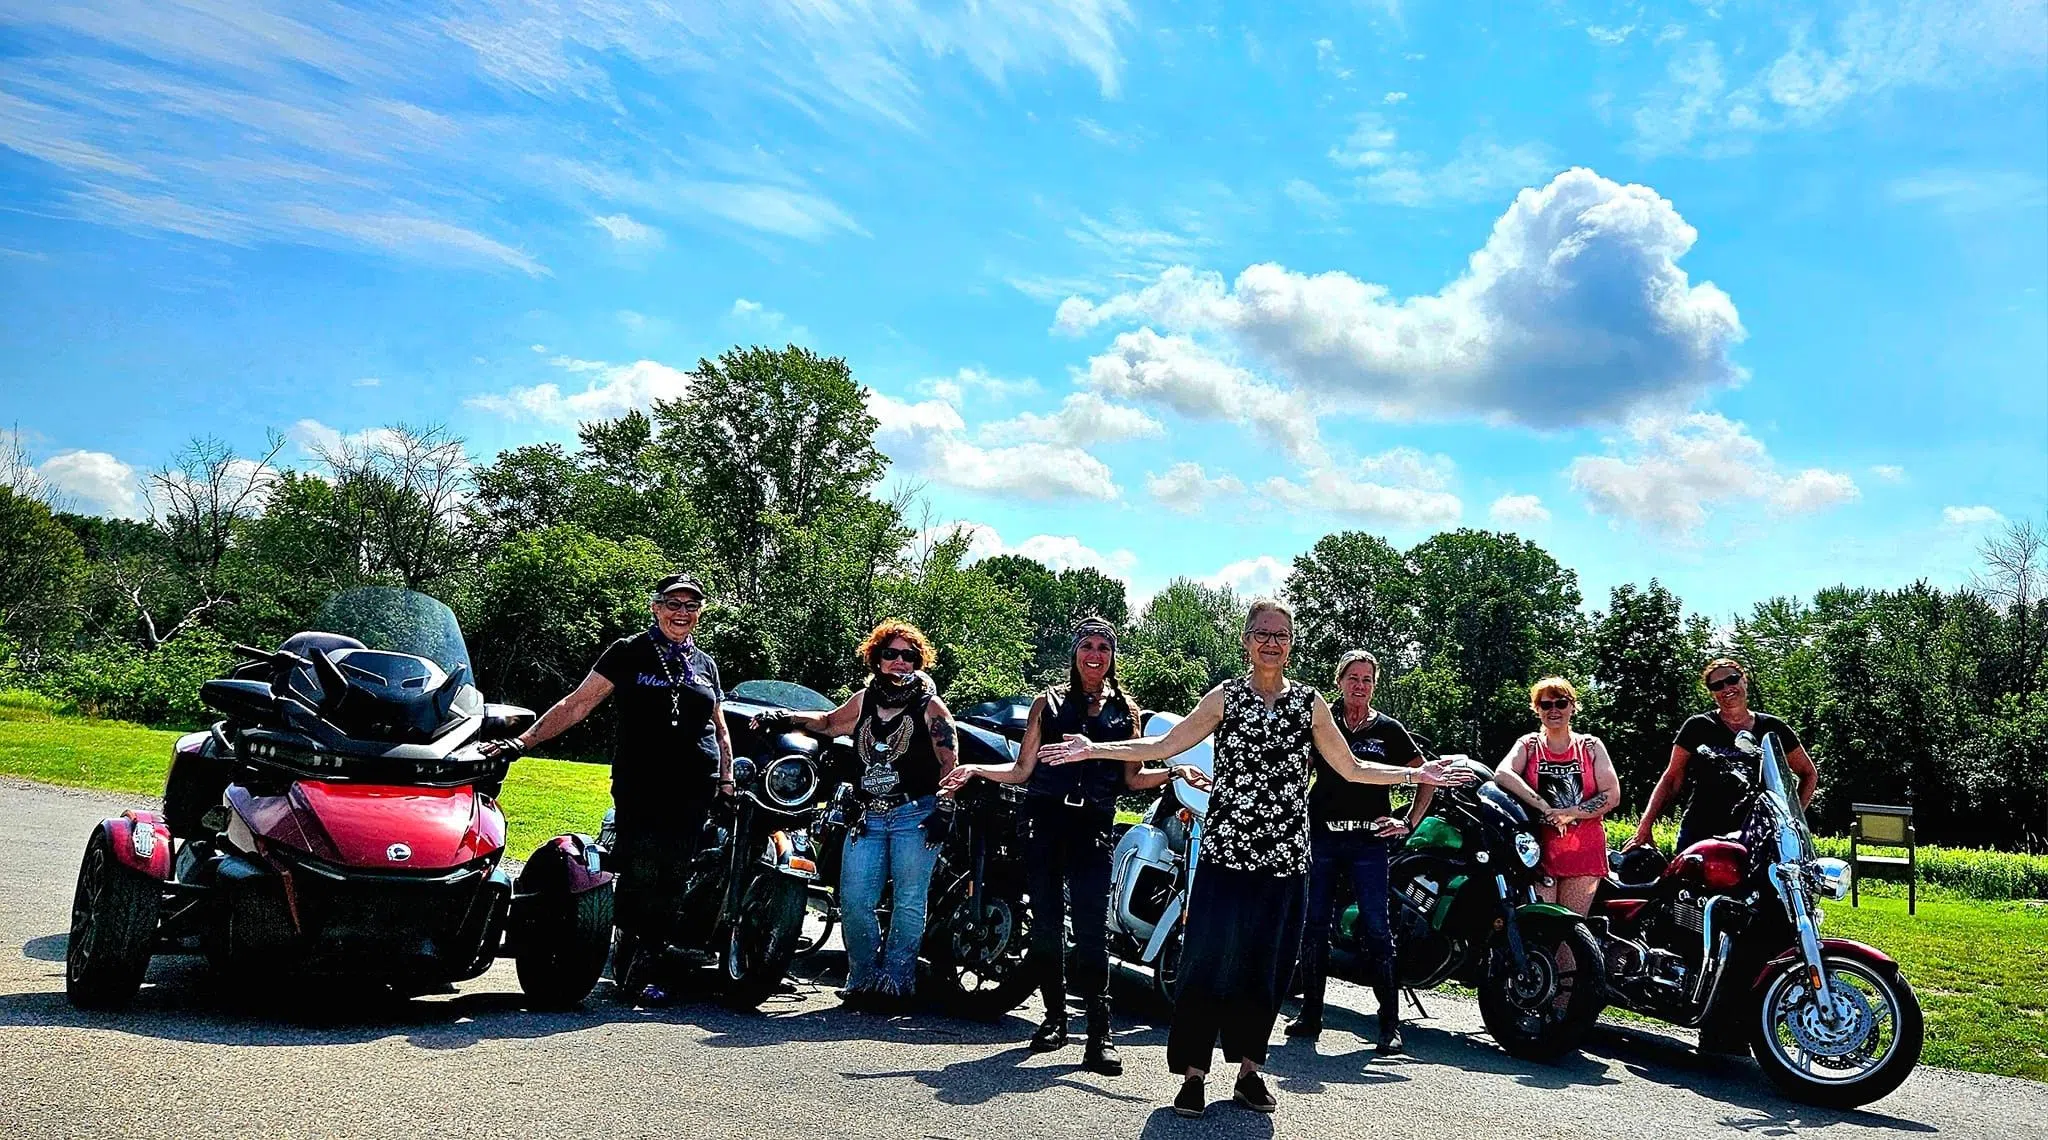 WindSisters ride for a worthy cause